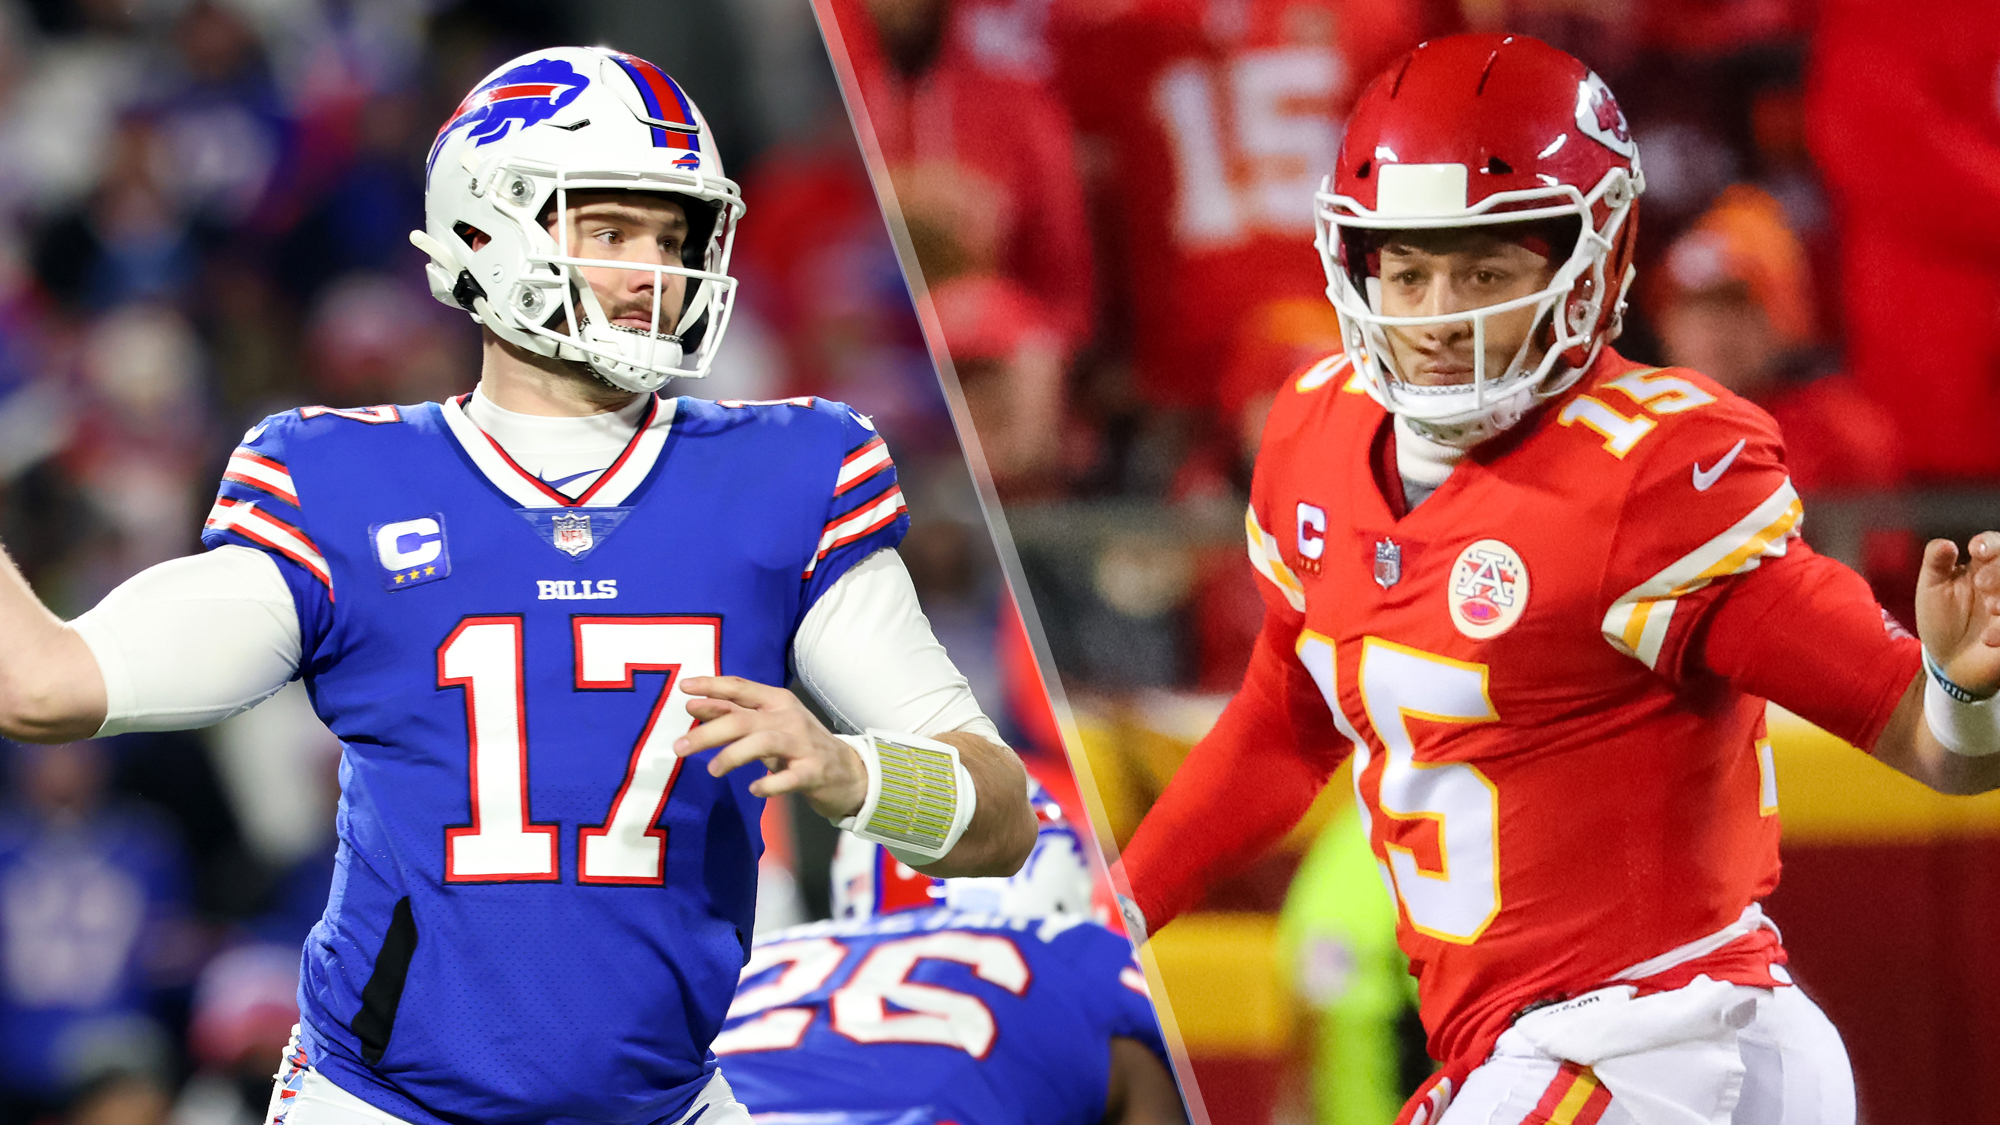 Bills vs Chiefs live stream: How to watch NFL Playoffs Divisional